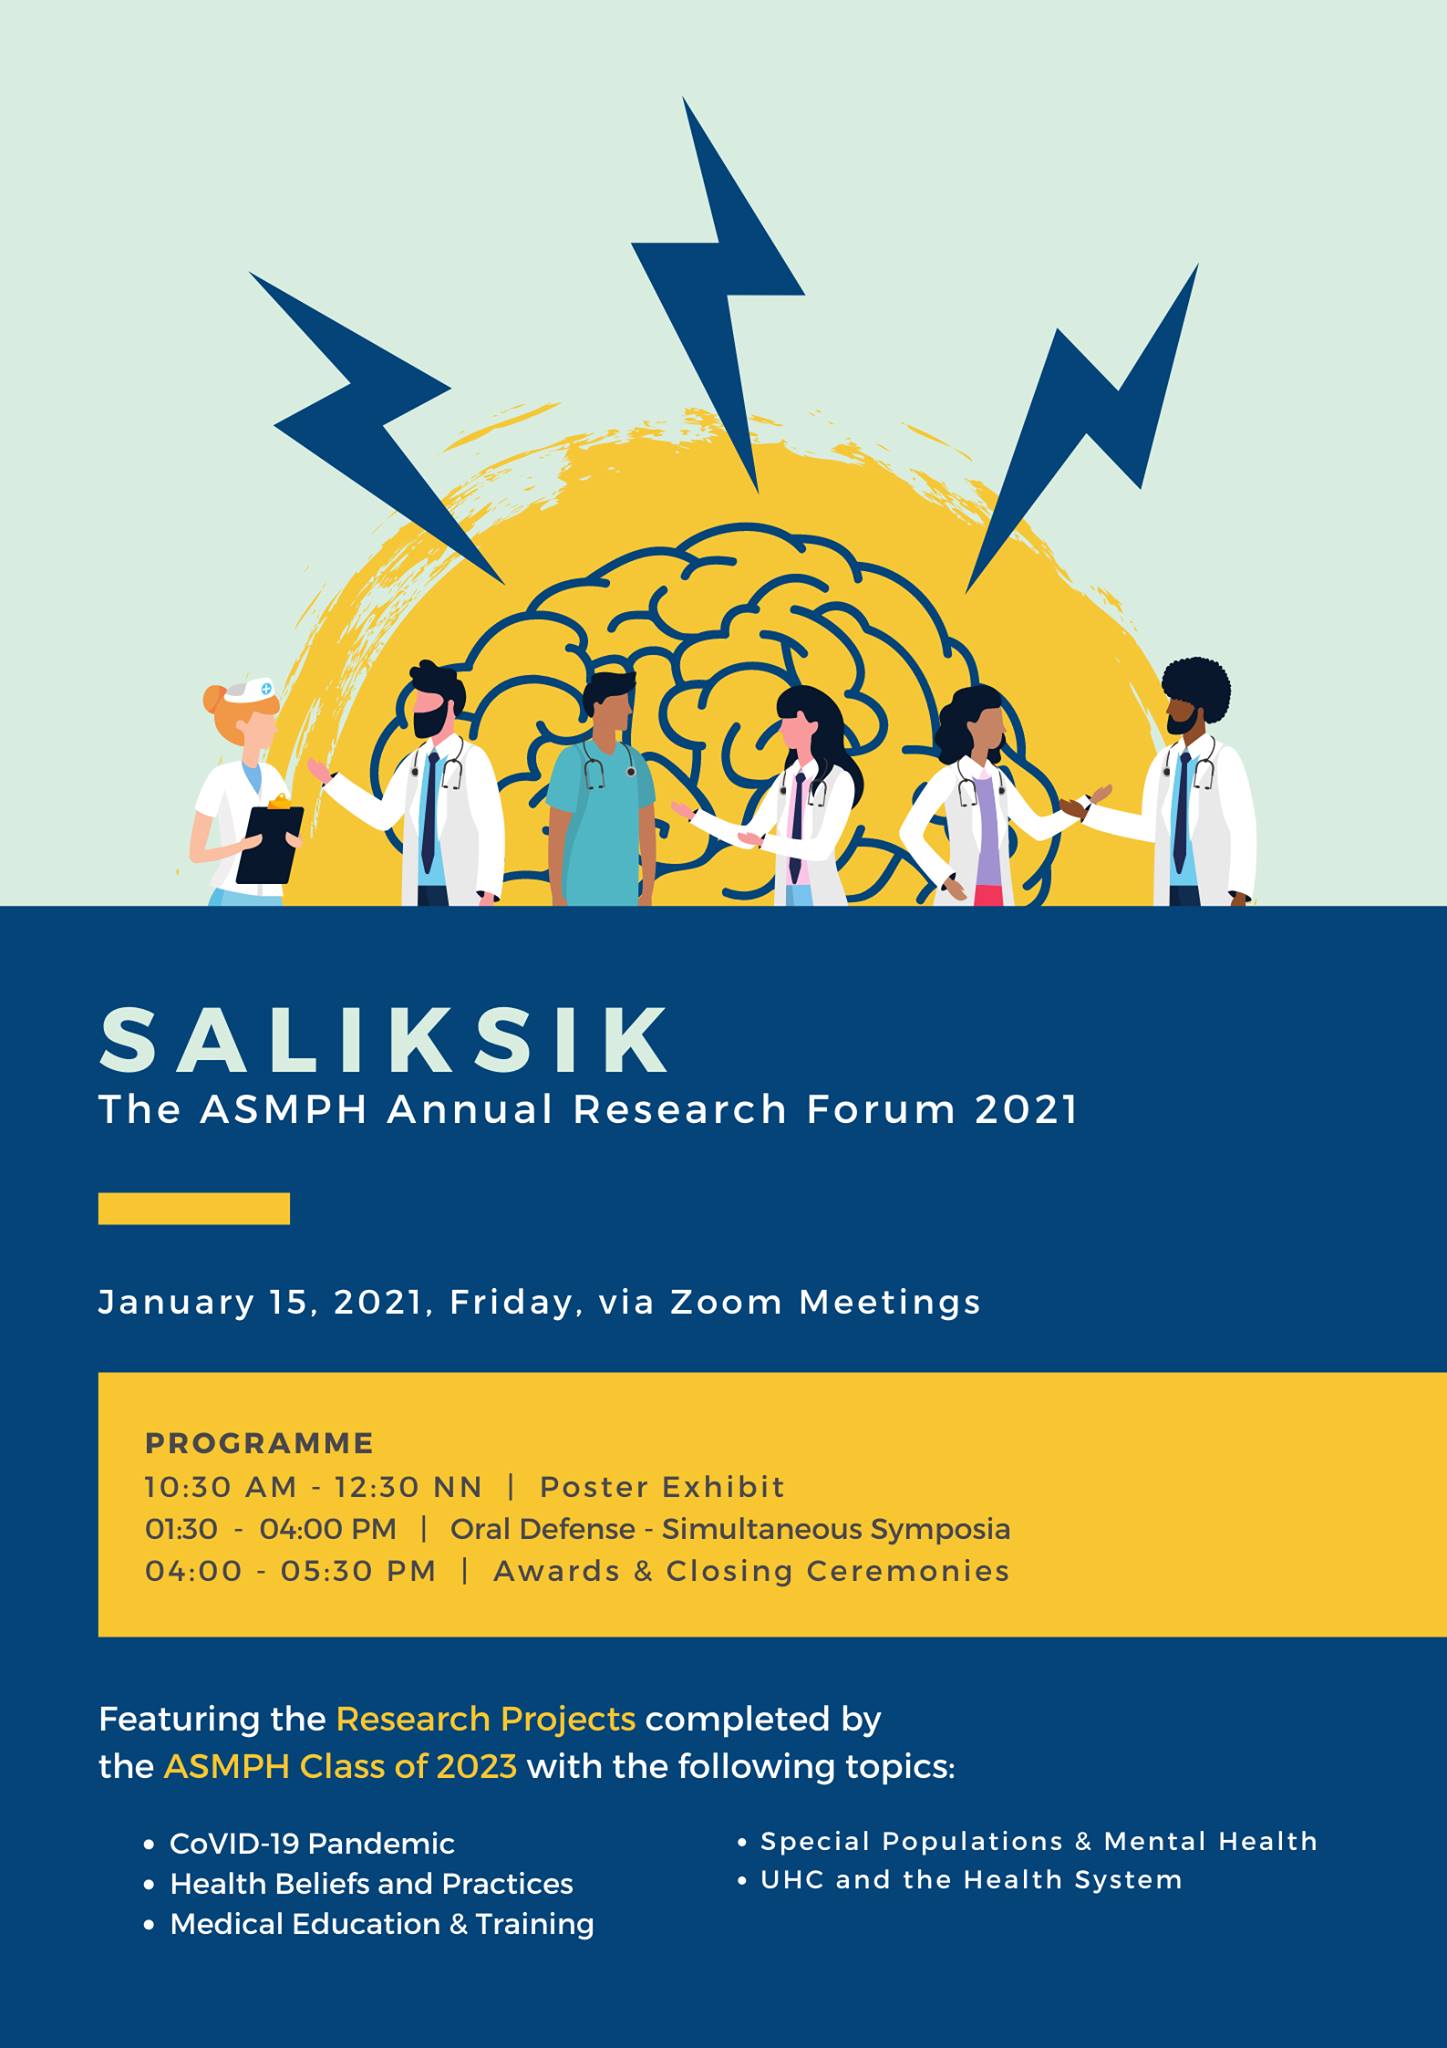  Featured image for article title Saliksik 2021: The ASMPH Annual Research Forum